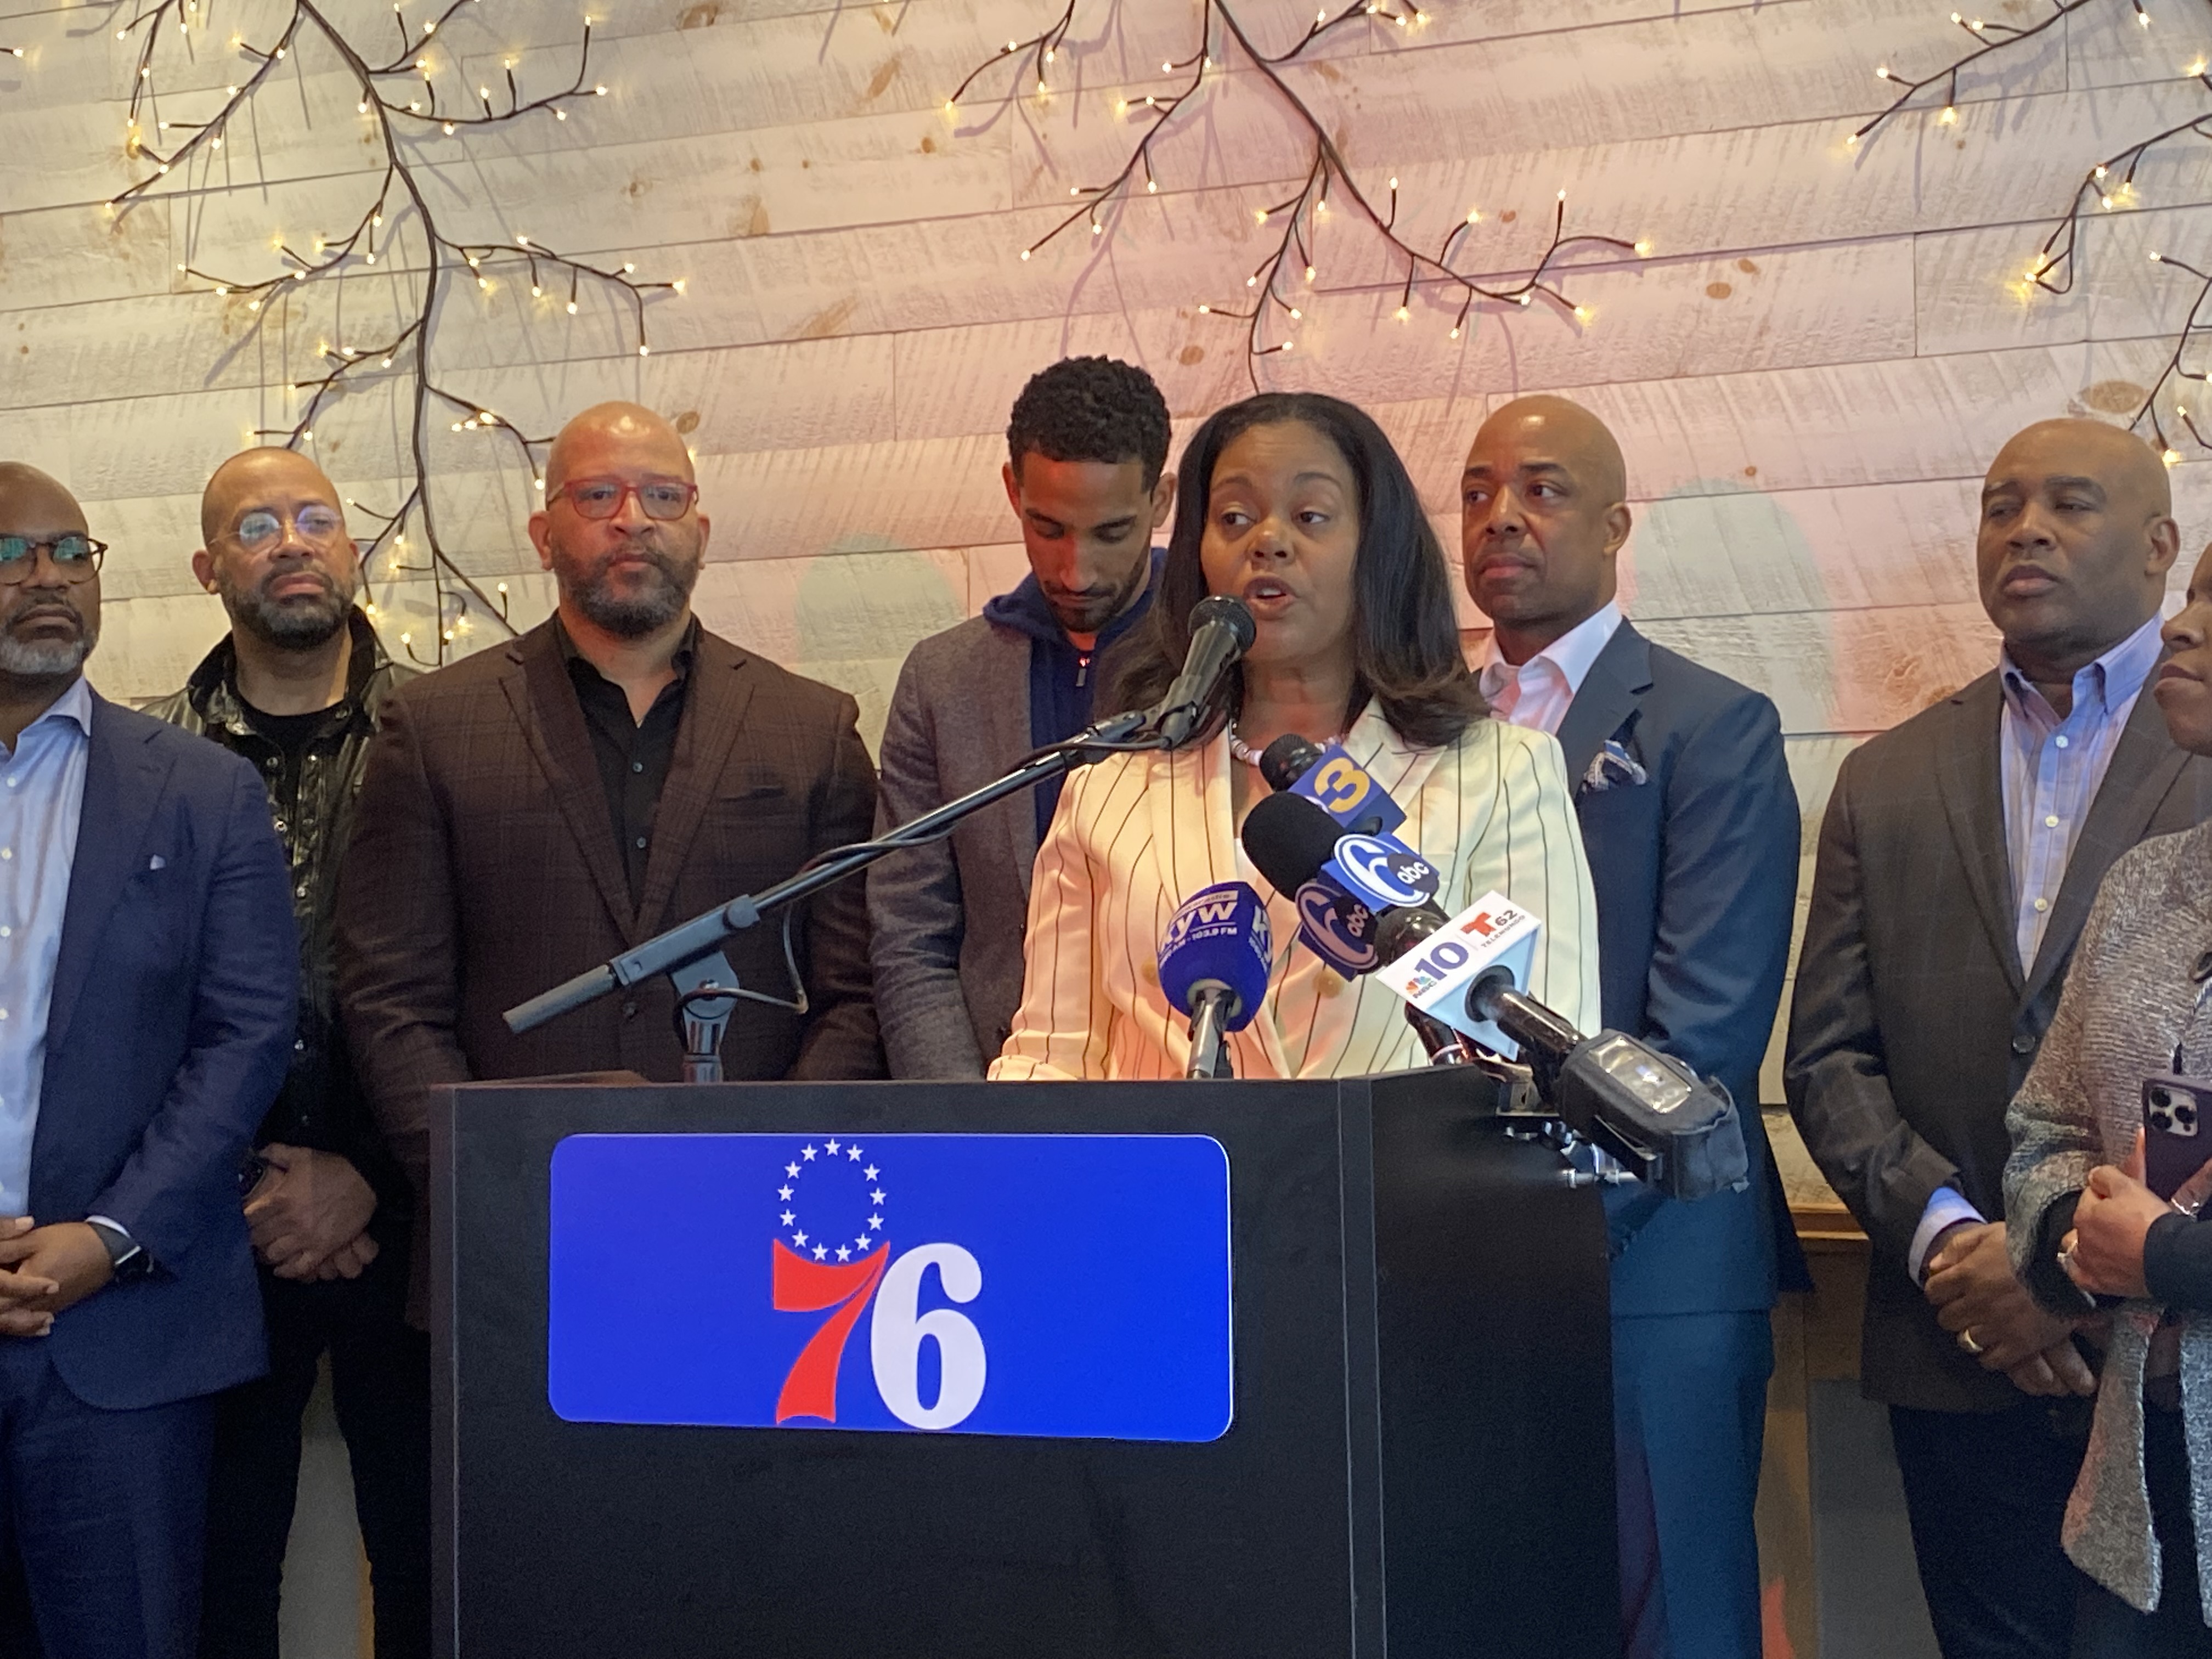 African American Chamber CEO Regina A. Hairston speaks in support of new Sixers arena proposal in Center City. Photo Credit: 76 Place.